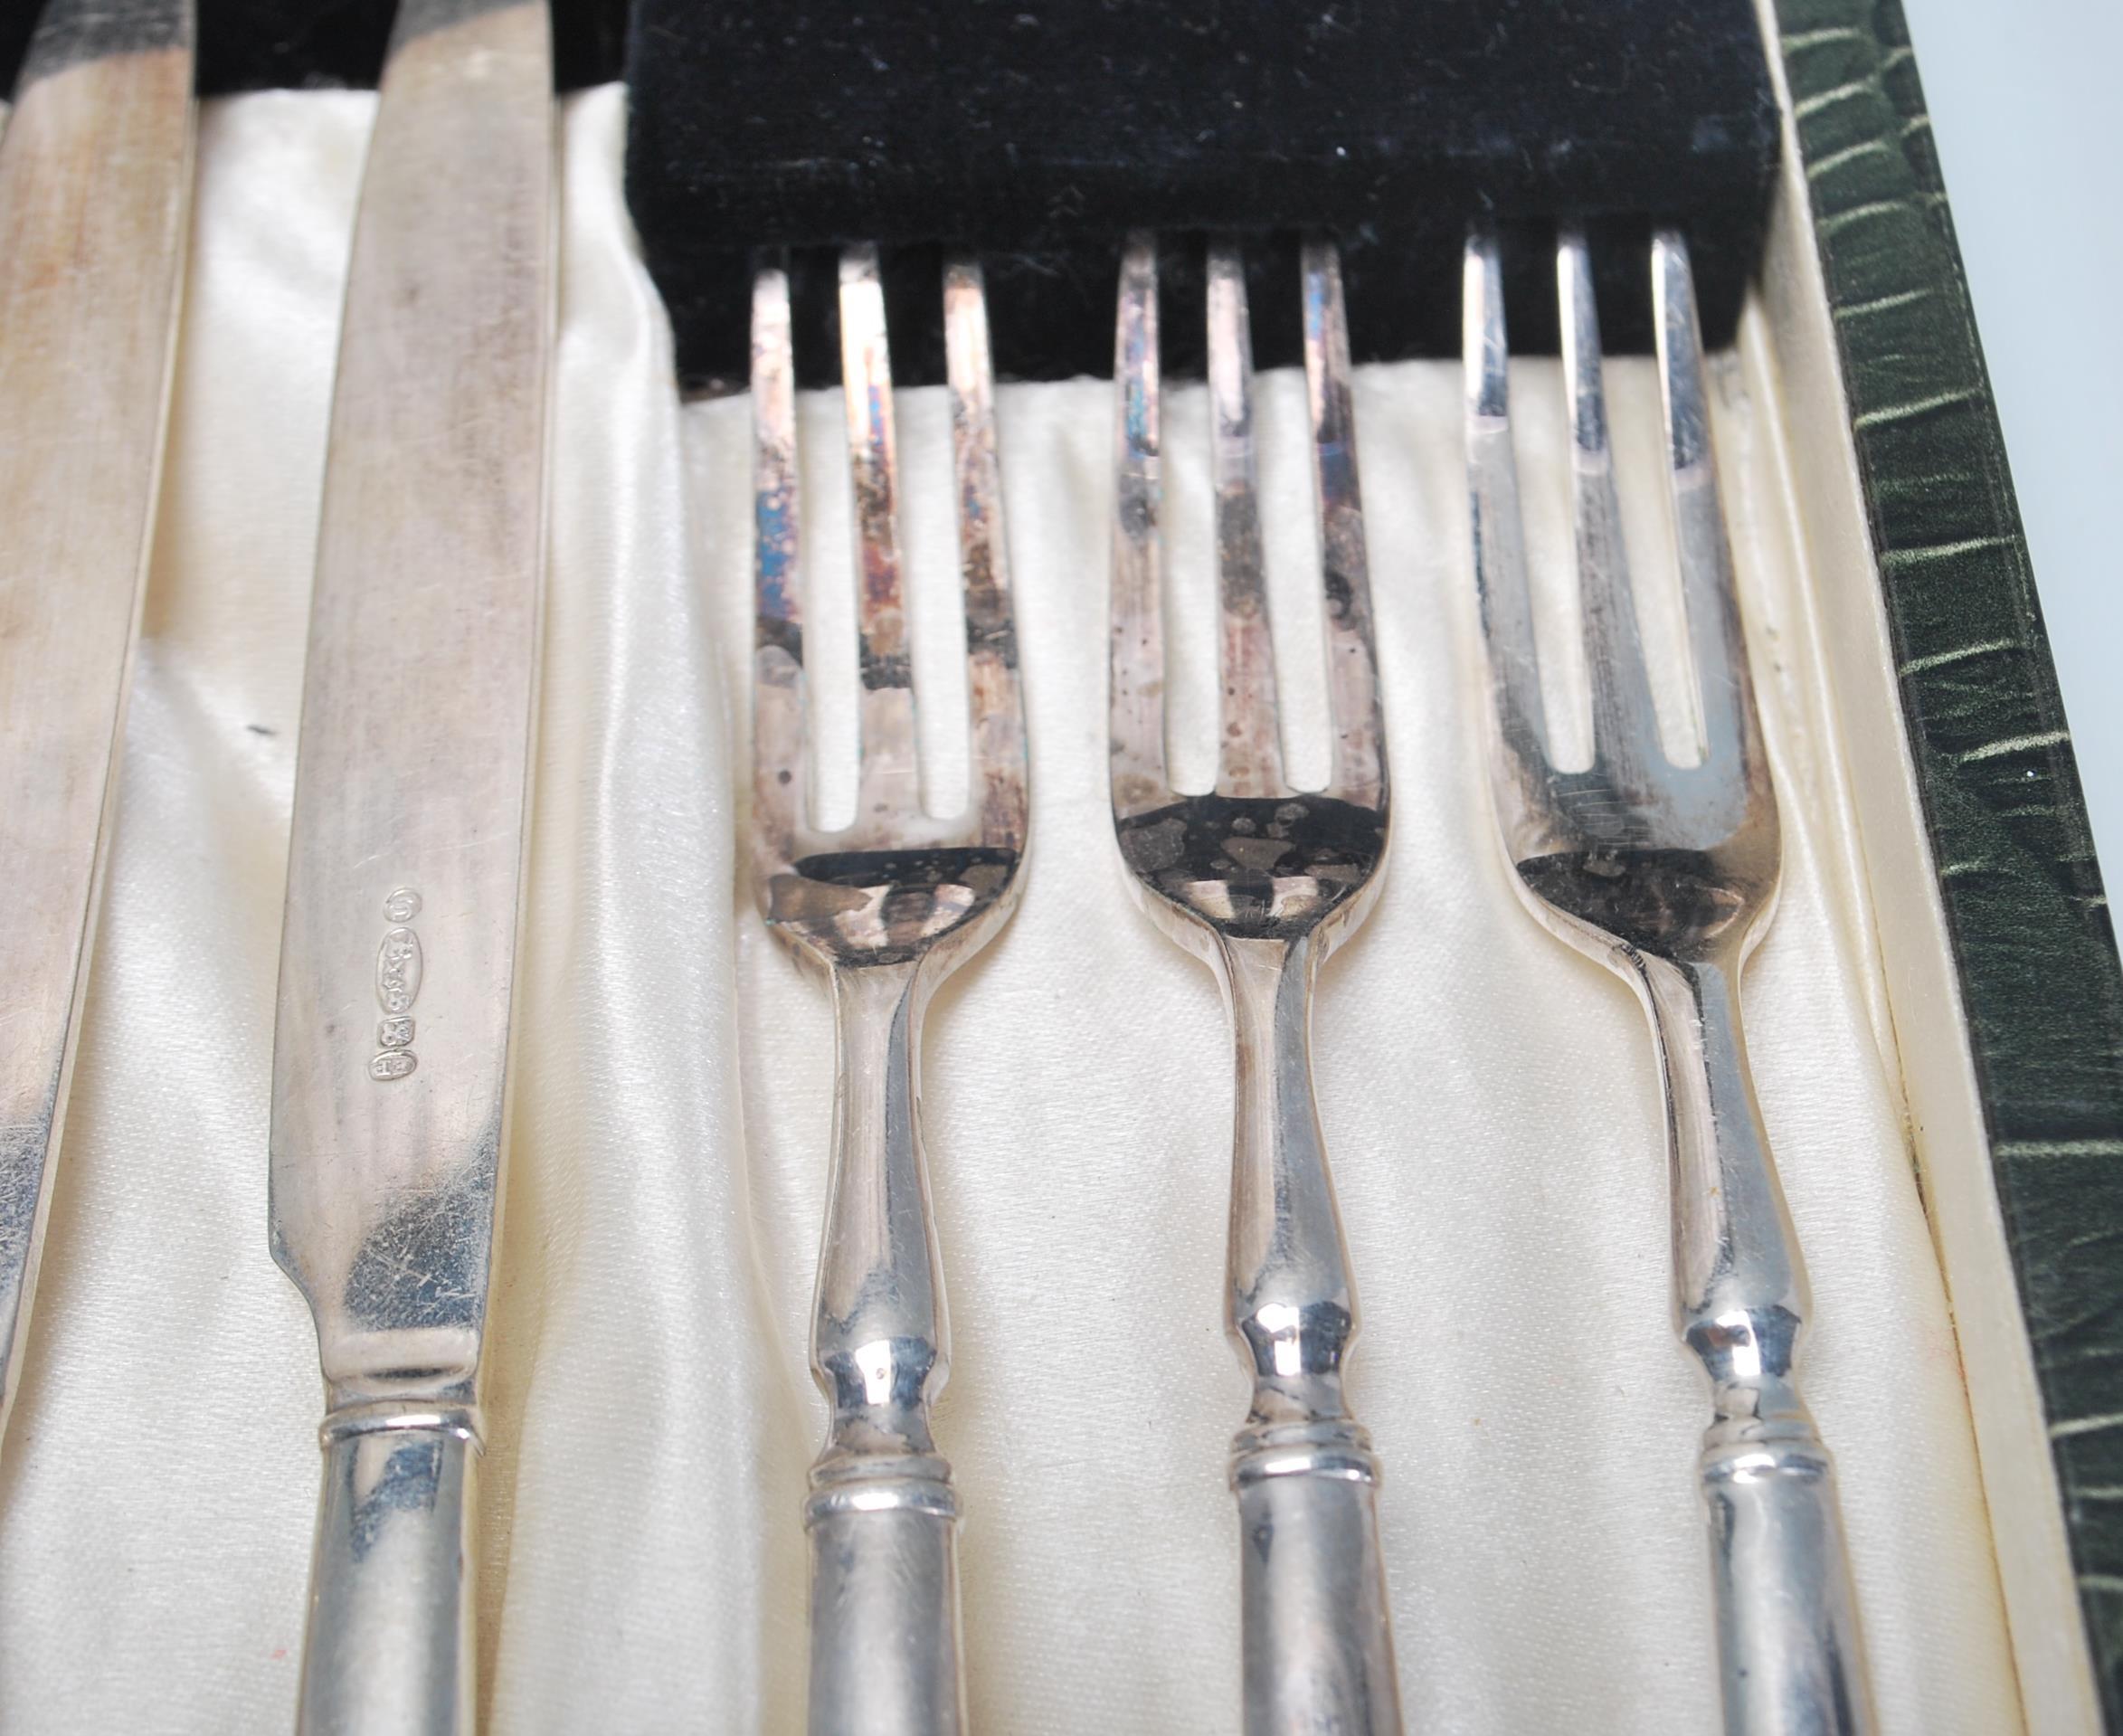 A vintage silver plated cake knife and fork set consisting of six knives and forks set within its - Image 6 of 9